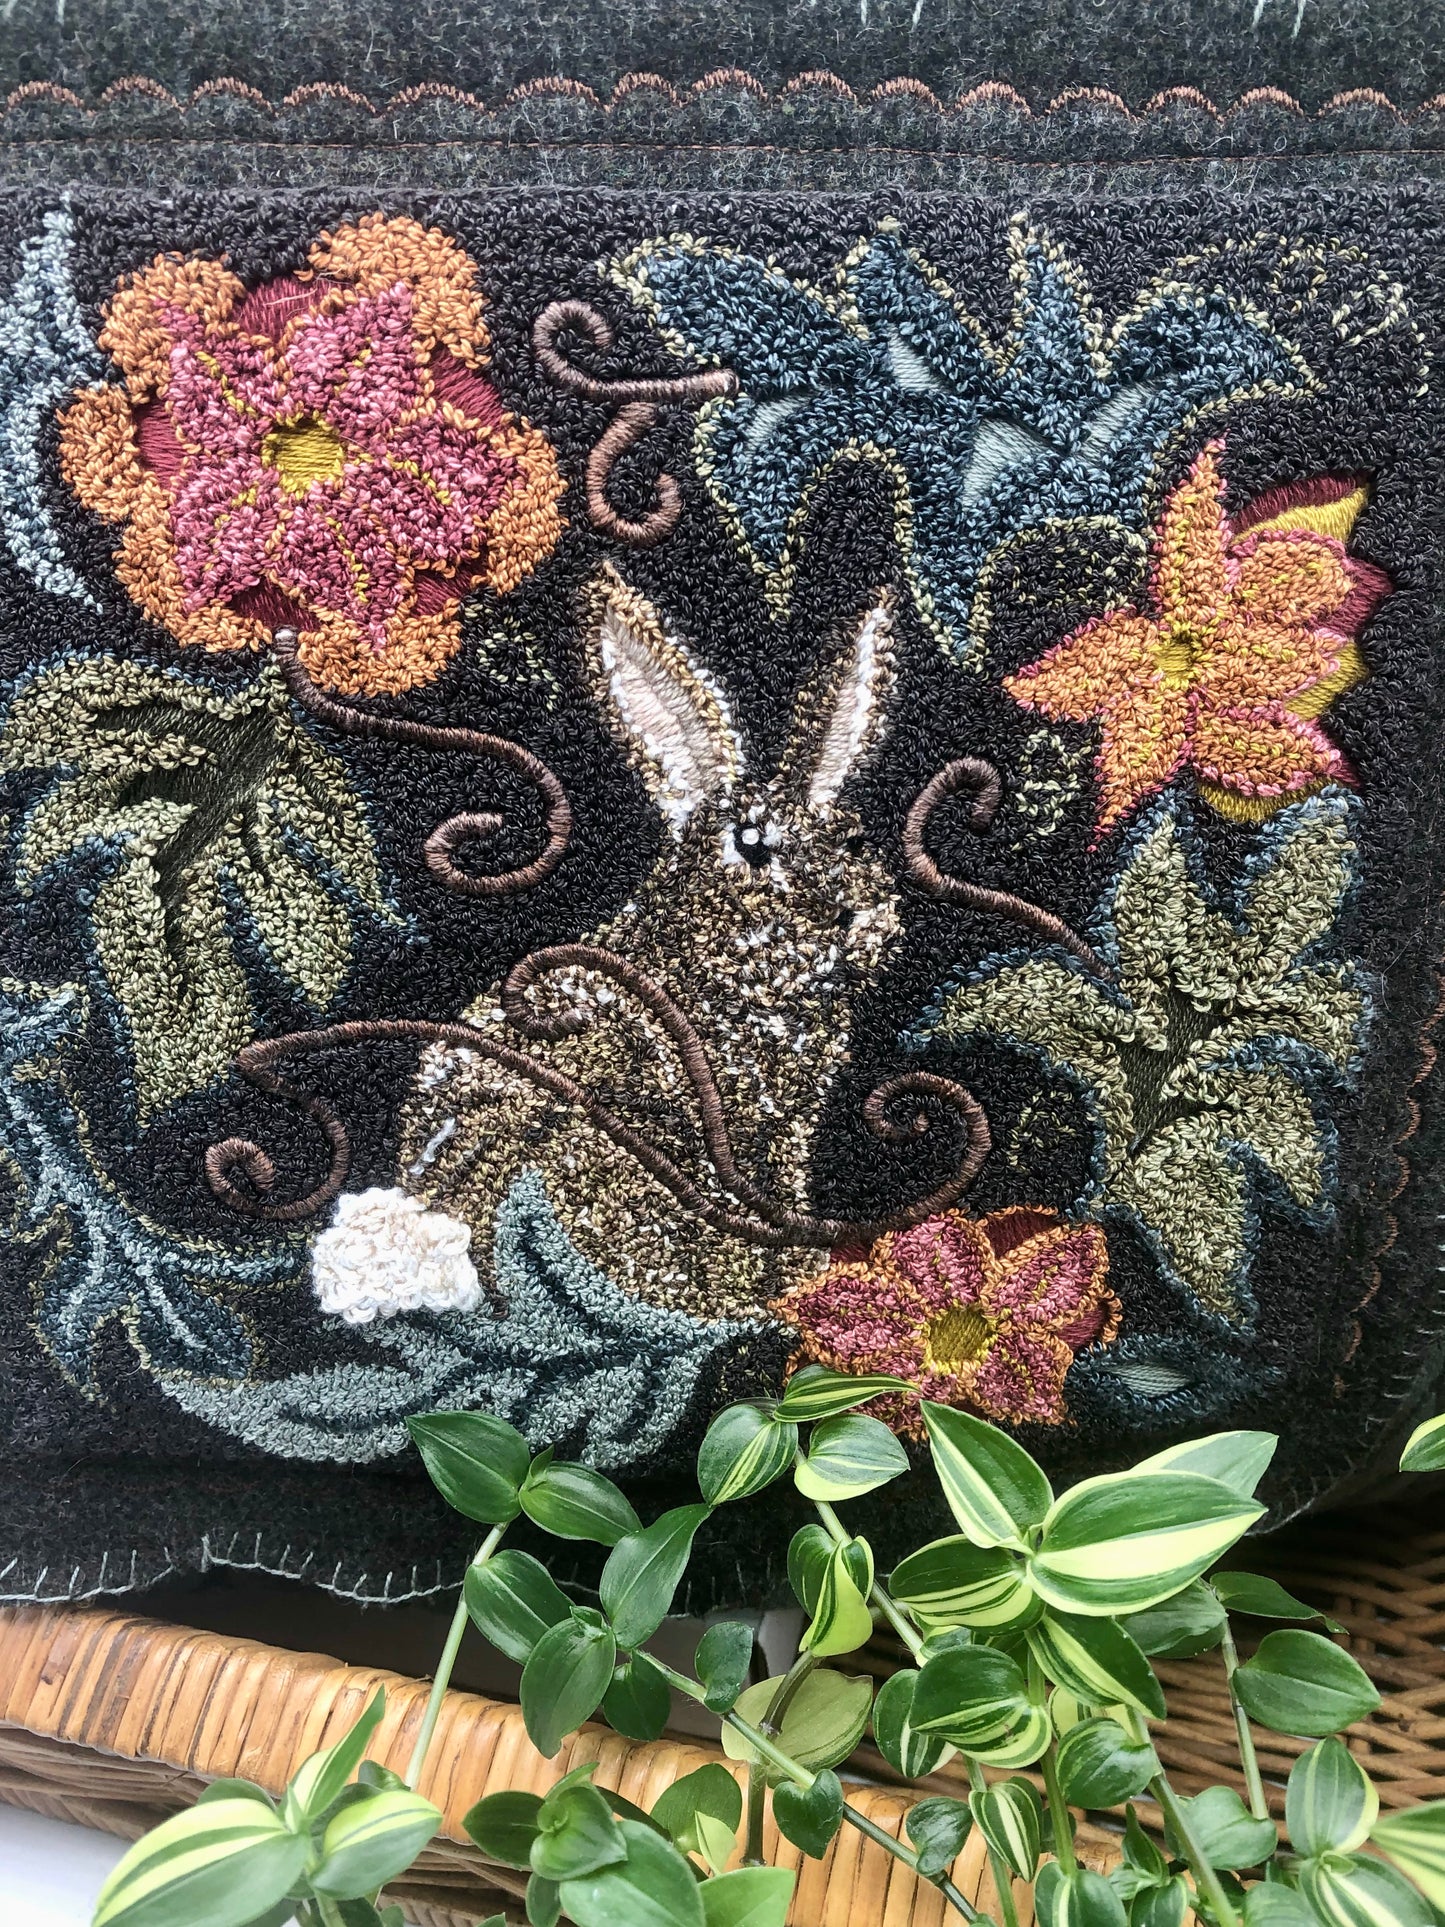 Garden Rabbit Punch Needle pattern by Orphaned Wool. Design can be finished using Valdani Threads or Dmc Floss. Beautiful Garden Rabbit pattern with flowers and leaves. A lovely pillow design.